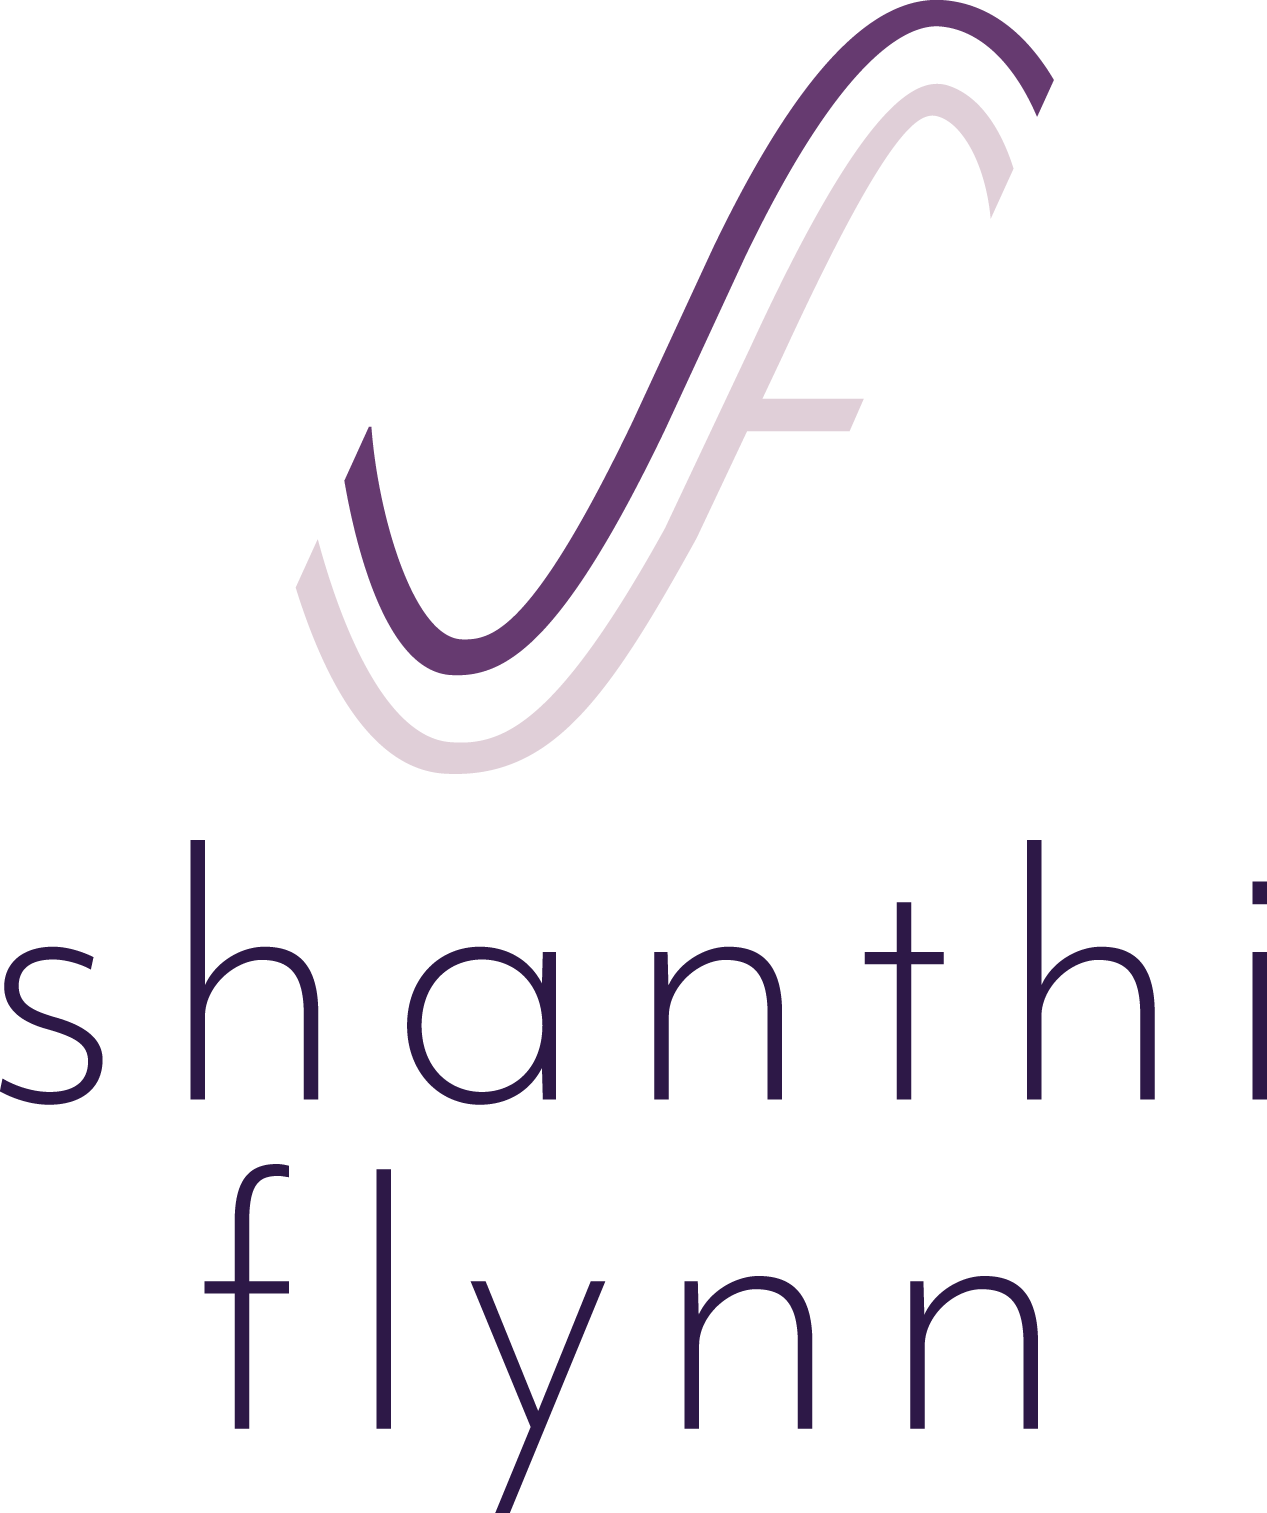 Too much religion and not enough ethics - Shanthi Flynn